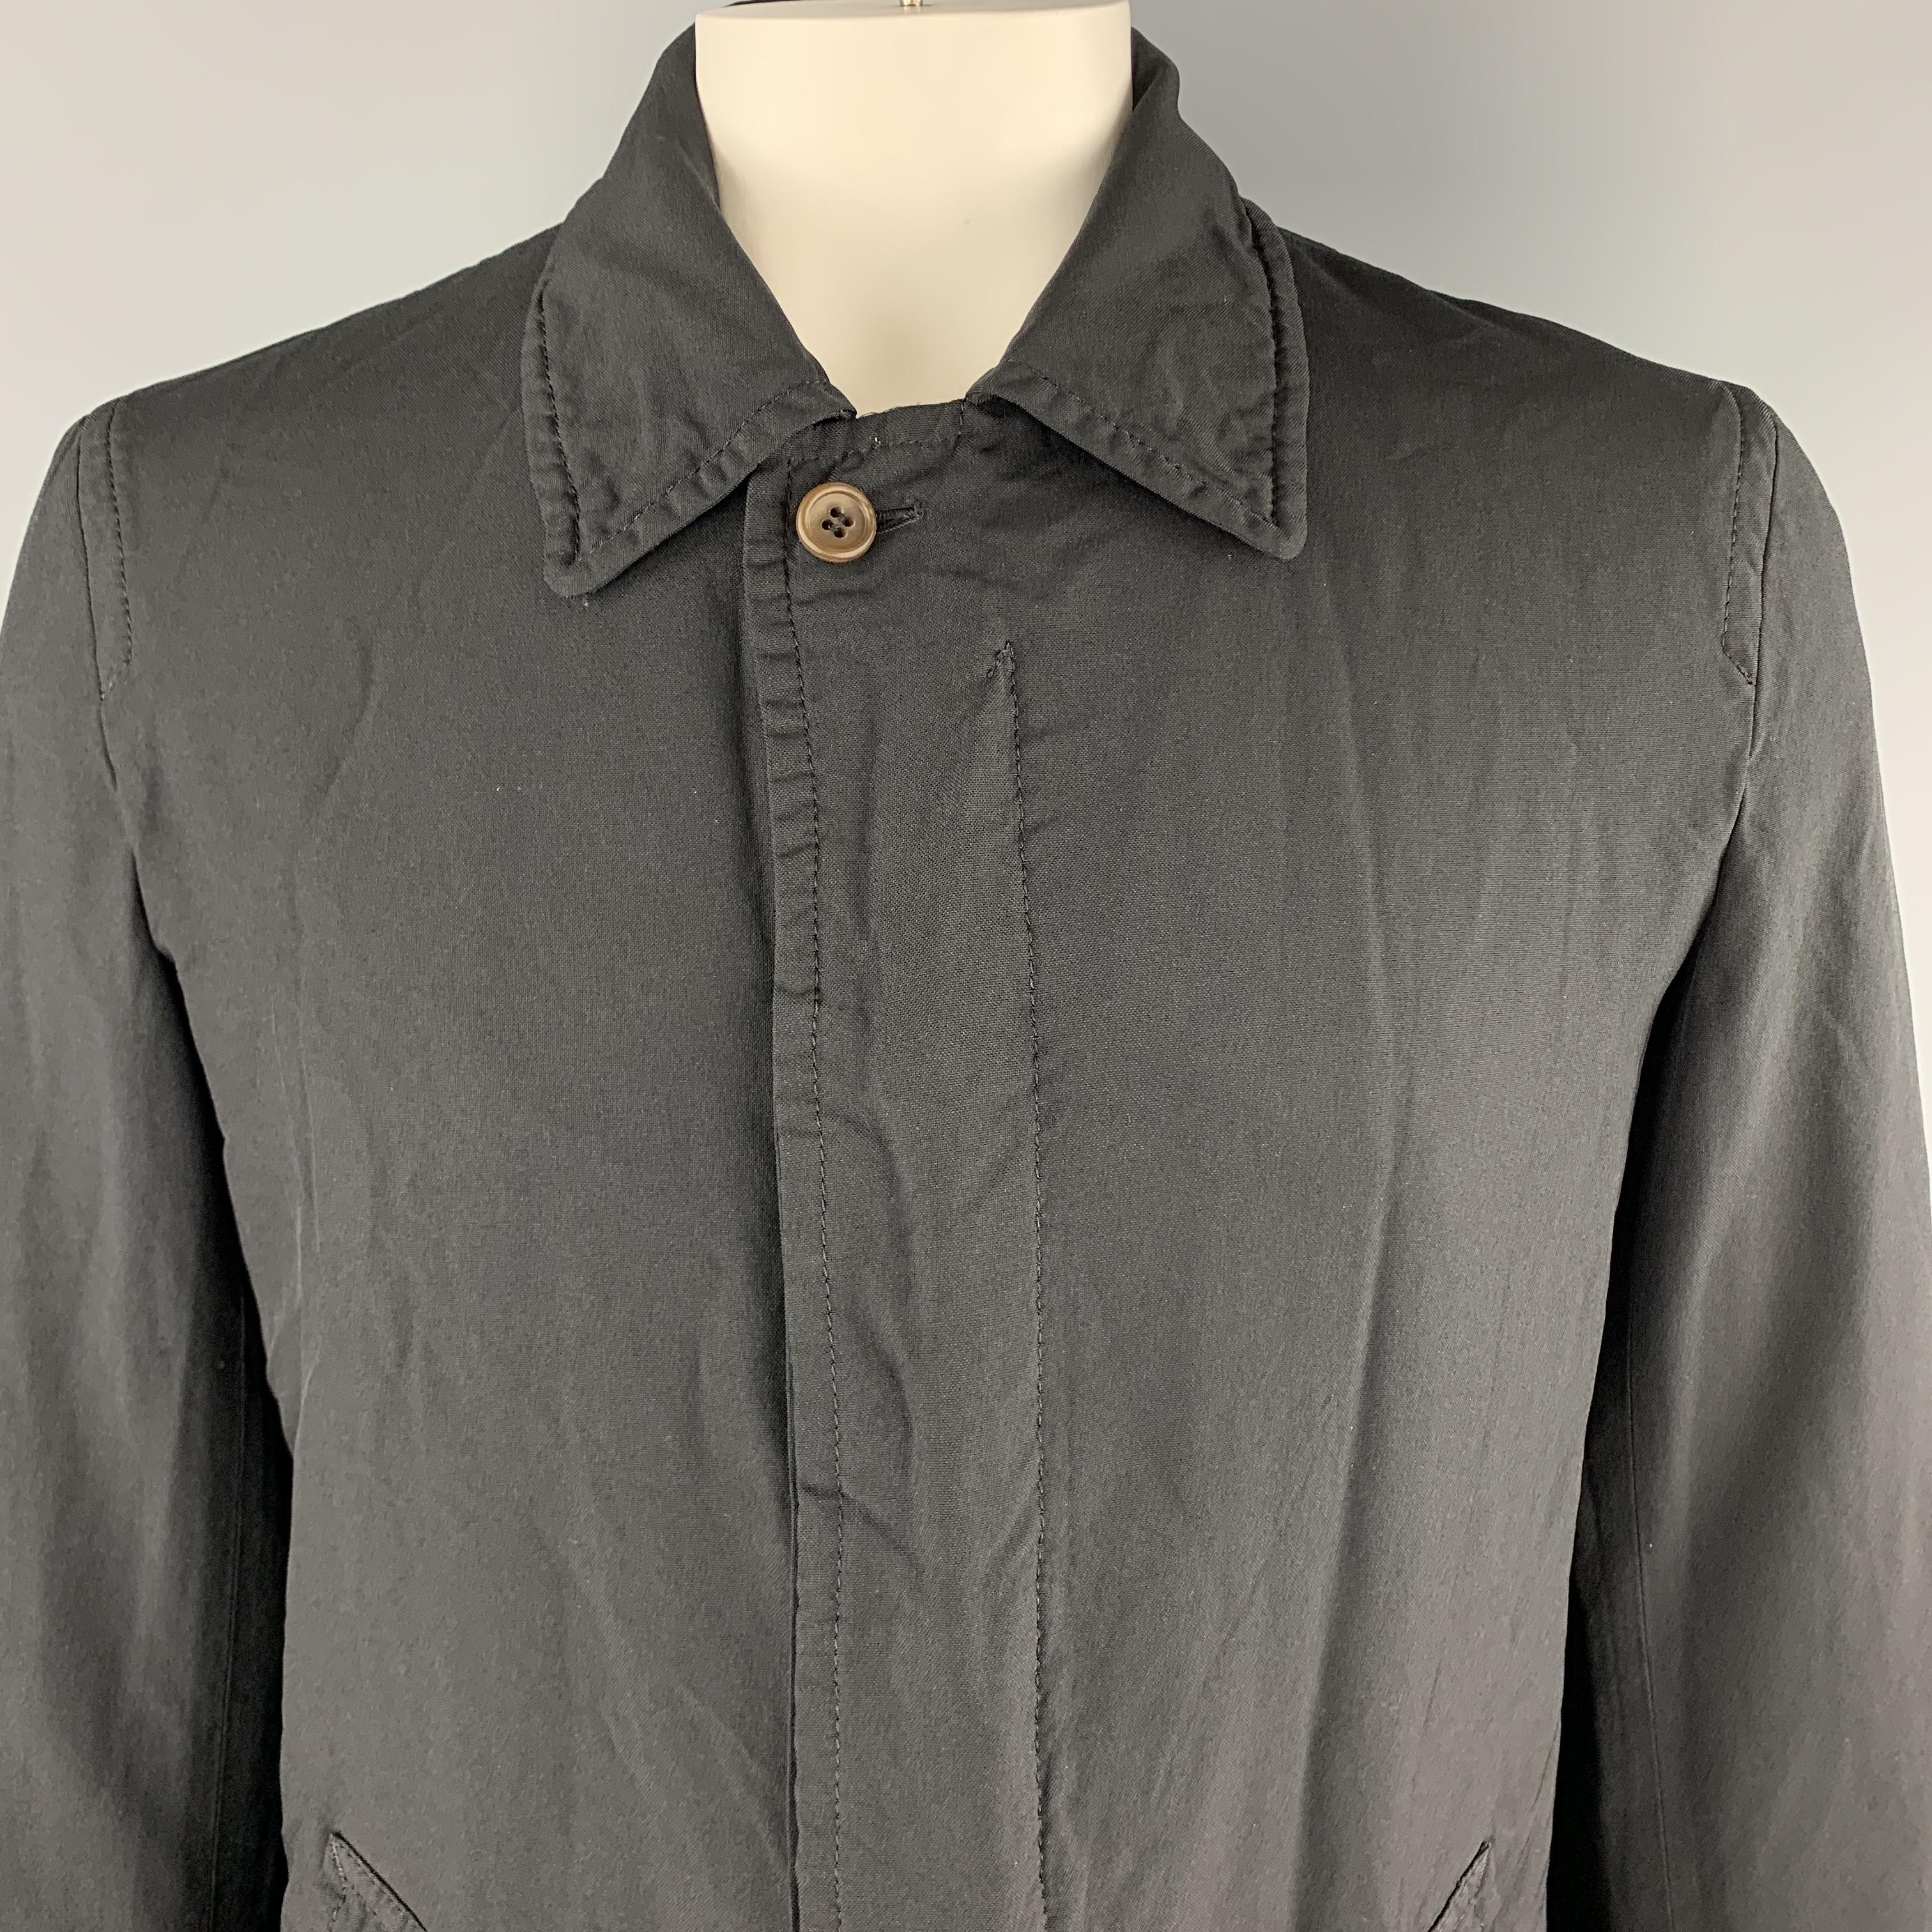 COMME des GARCONS HOMME DEUX car coat comes in black wrinkle textured twill with a pointed collar, hidden placket button front, slanted pockets, and button tab cuffs. Made in Japan.

Excellent Pre-Owned Condition.
Marked: XL  AD